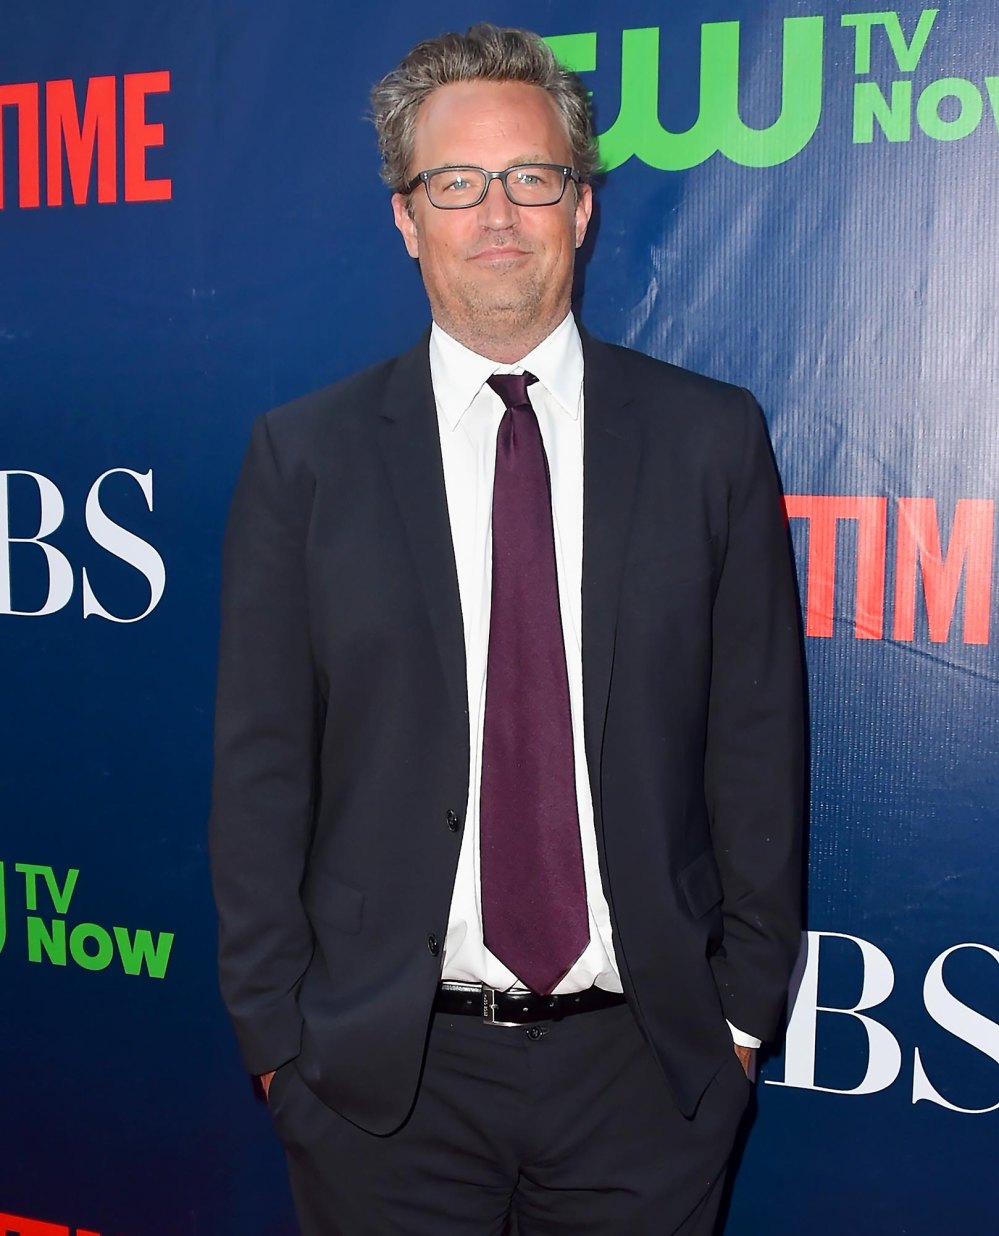 Matthew Perry Foundation is launched in the wake of actor's sudden death